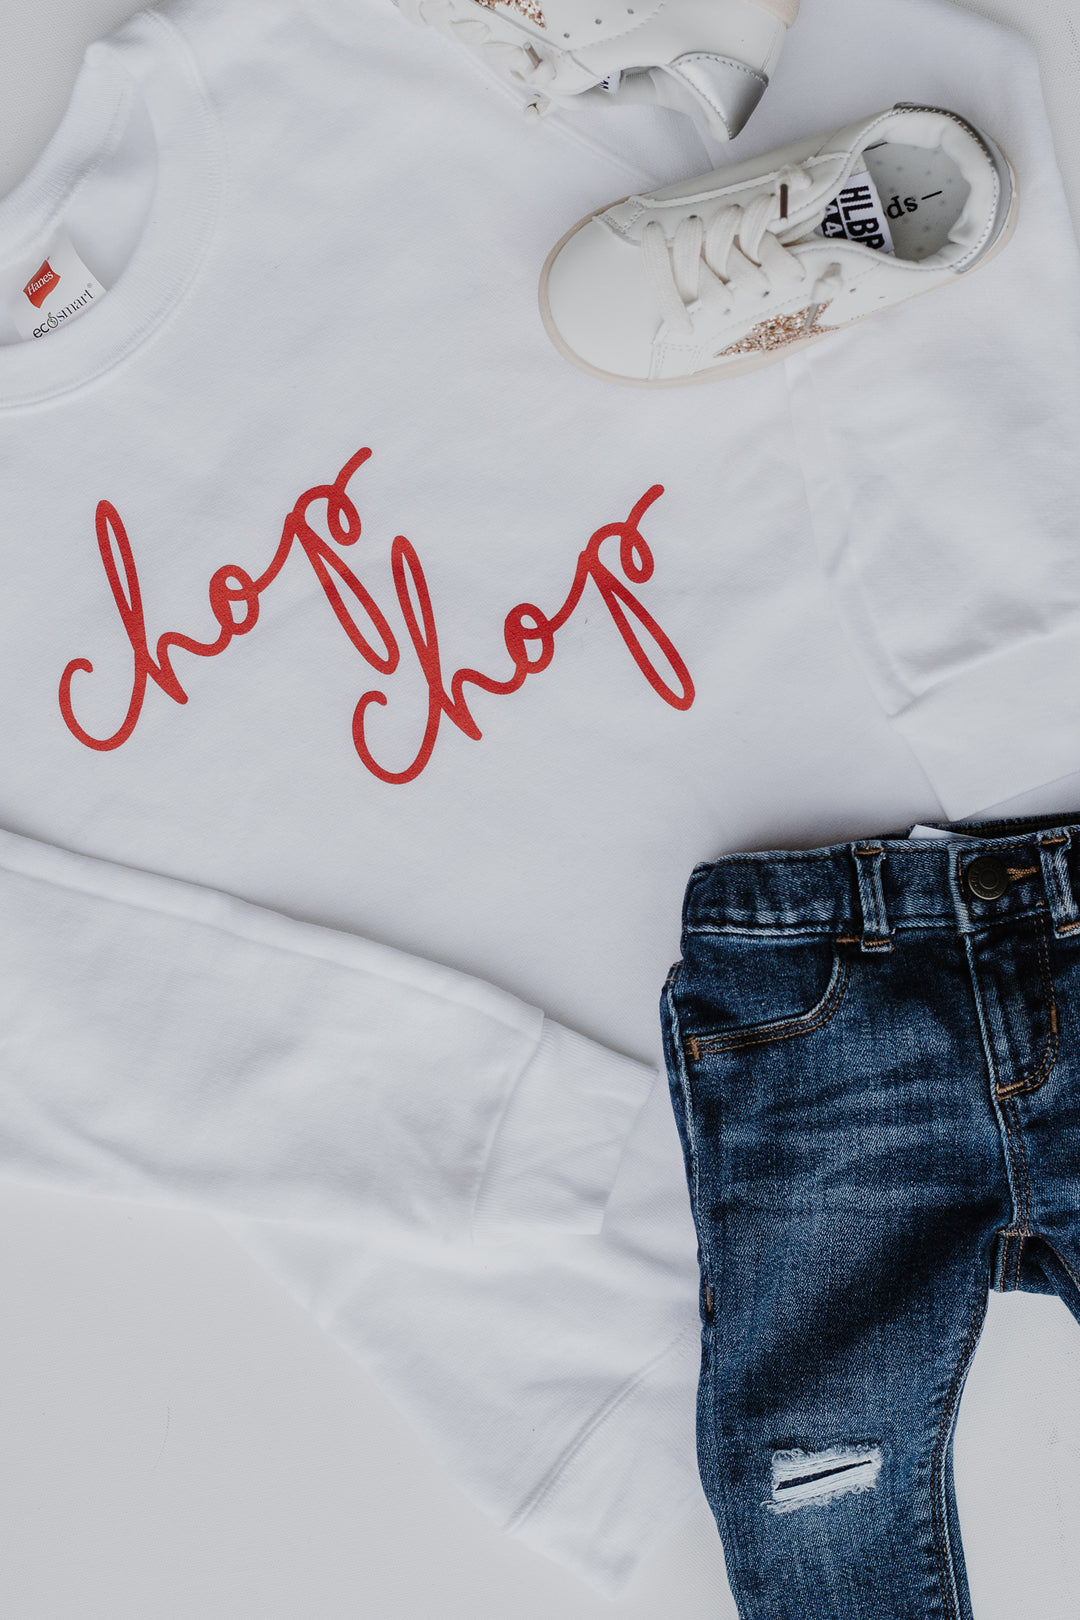 Youth Chop Chop Script Pullover. Braves Graphic Sweatshirt for Kids. Braves Game Day Outfit Kids